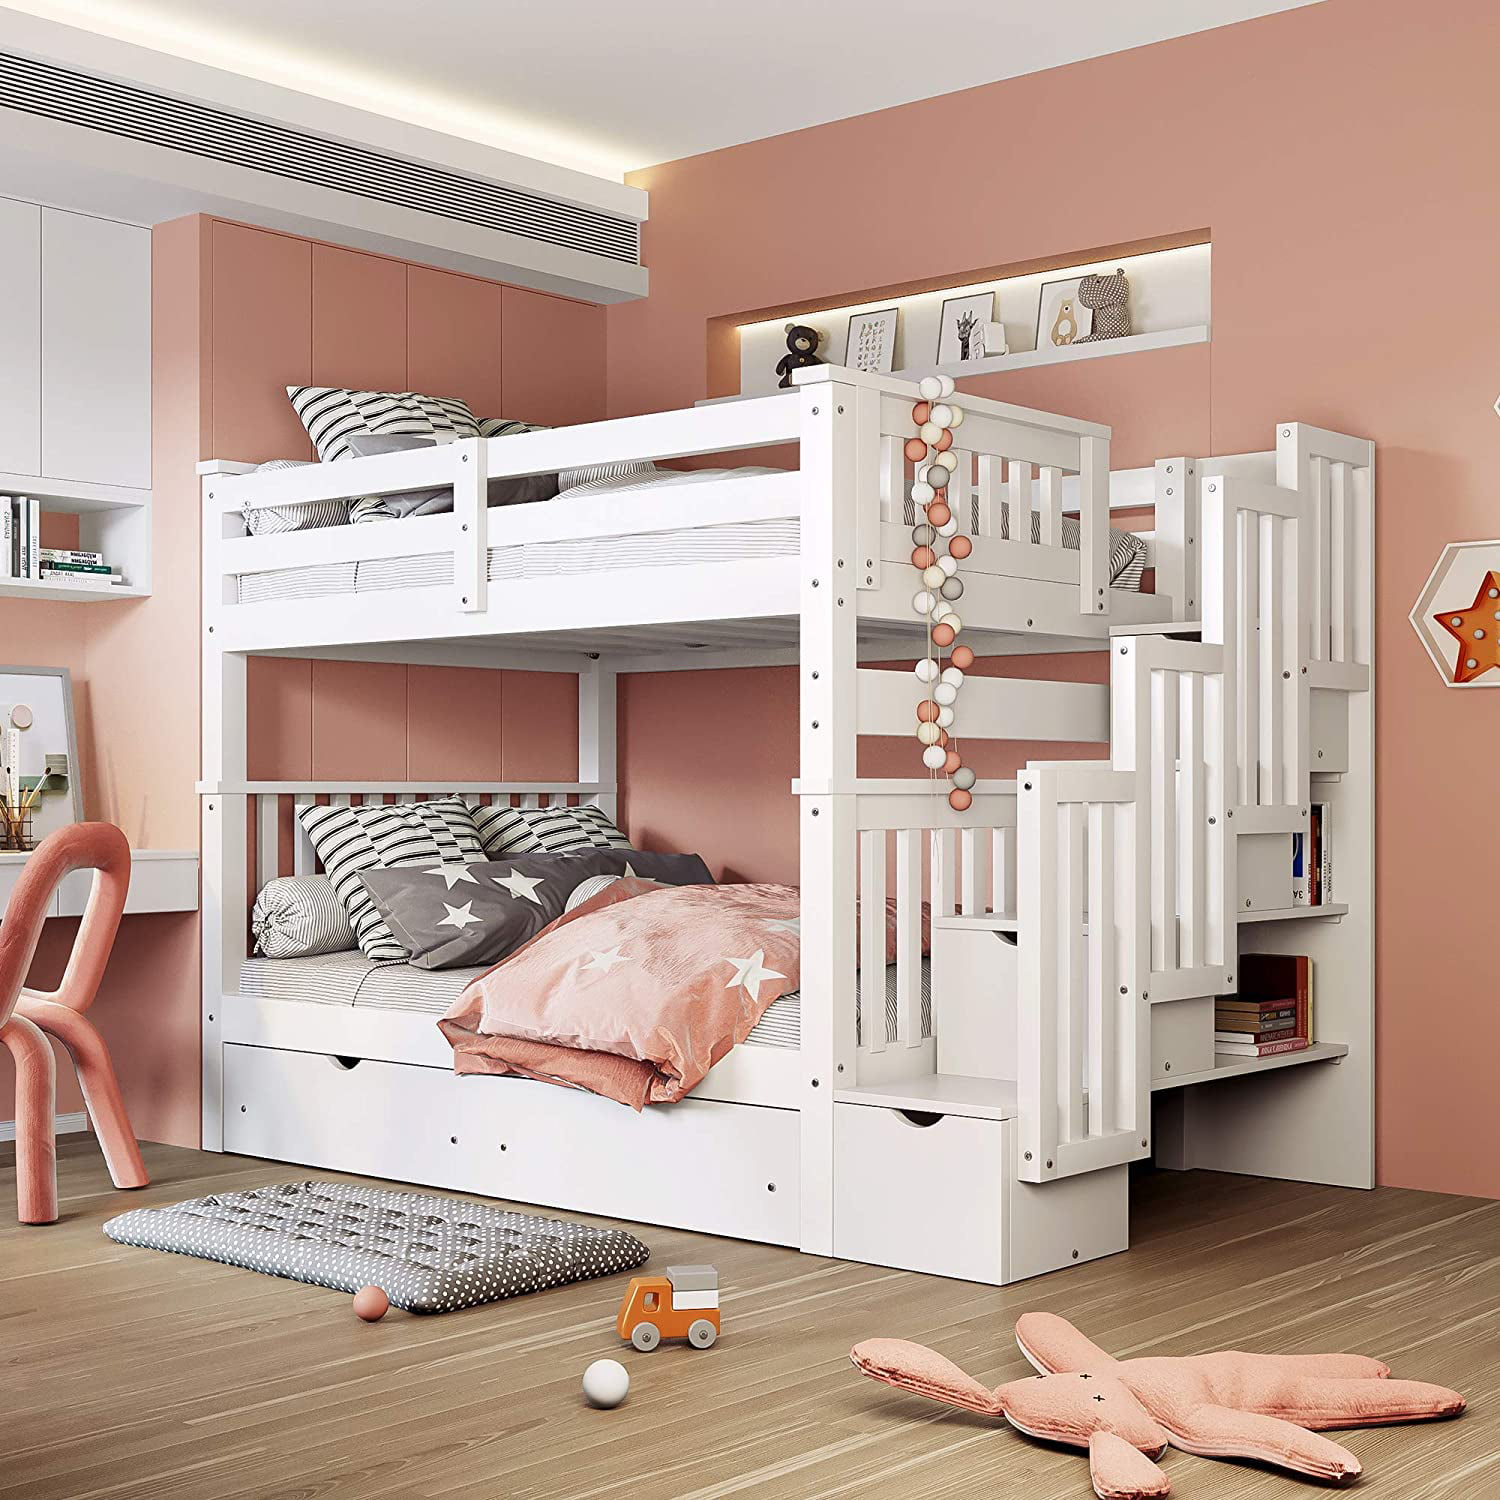 Full Stairway Bunk Bed, Full Bunk Bed With Storage